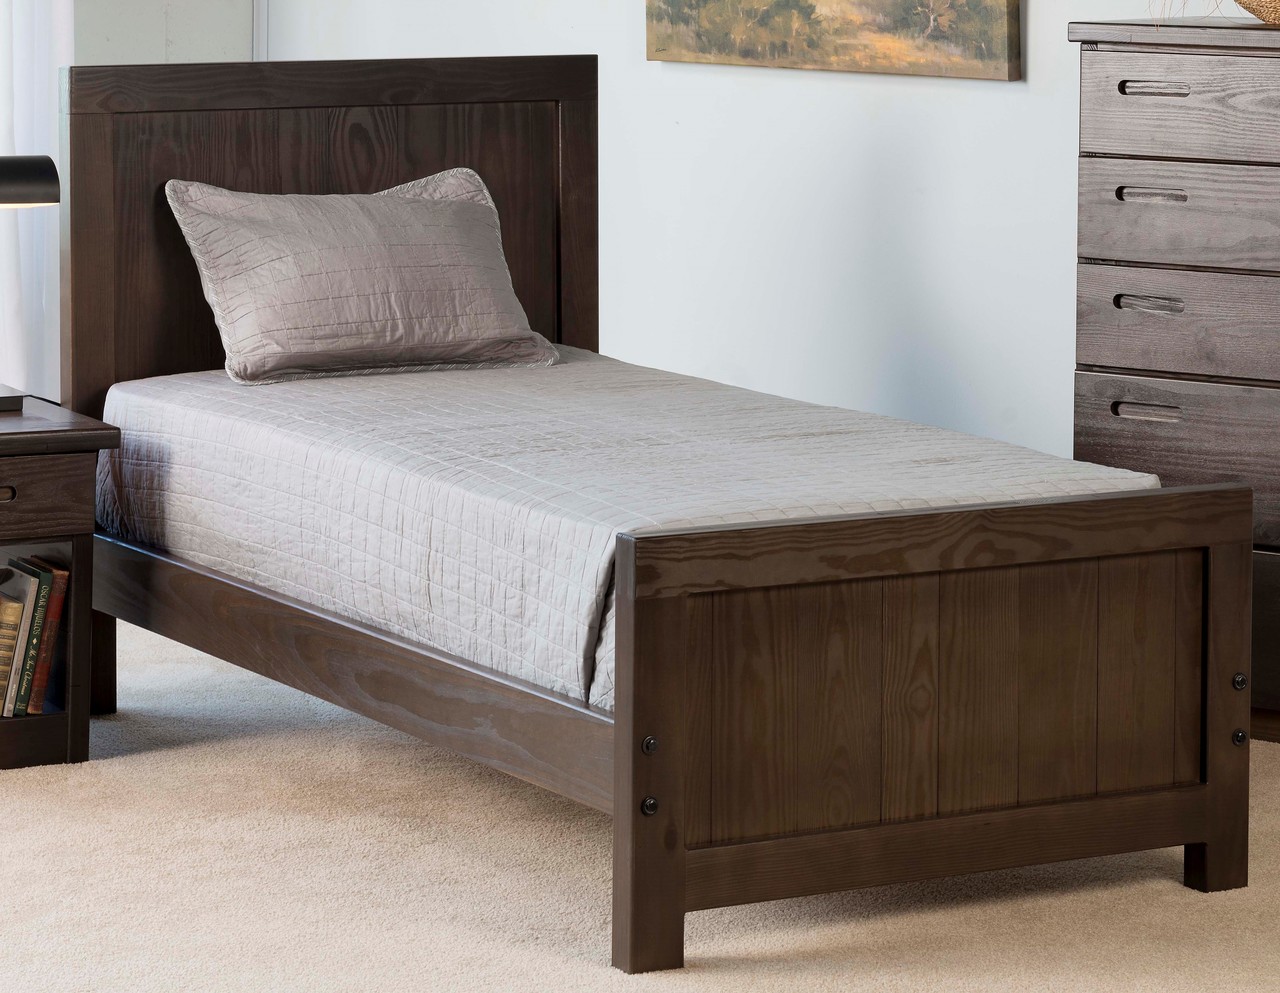 twin bed and mattress set